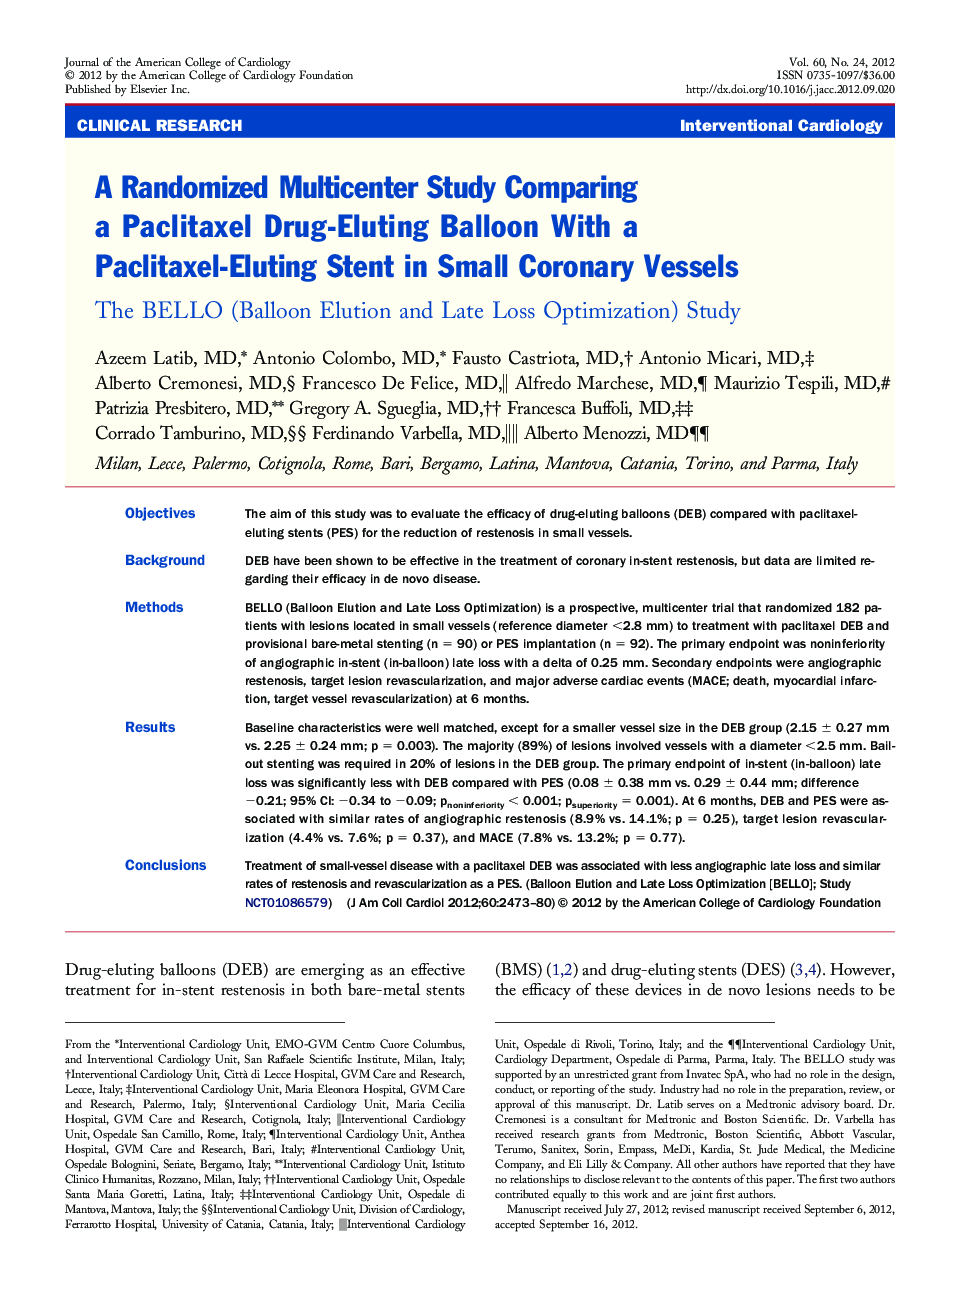 A Randomized Multicenter Study Comparing a Paclitaxel Drug-Eluting Balloon With a Paclitaxel-Eluting Stent in Small Coronary Vessels : The BELLO (Balloon Elution and Late Loss Optimization) Study